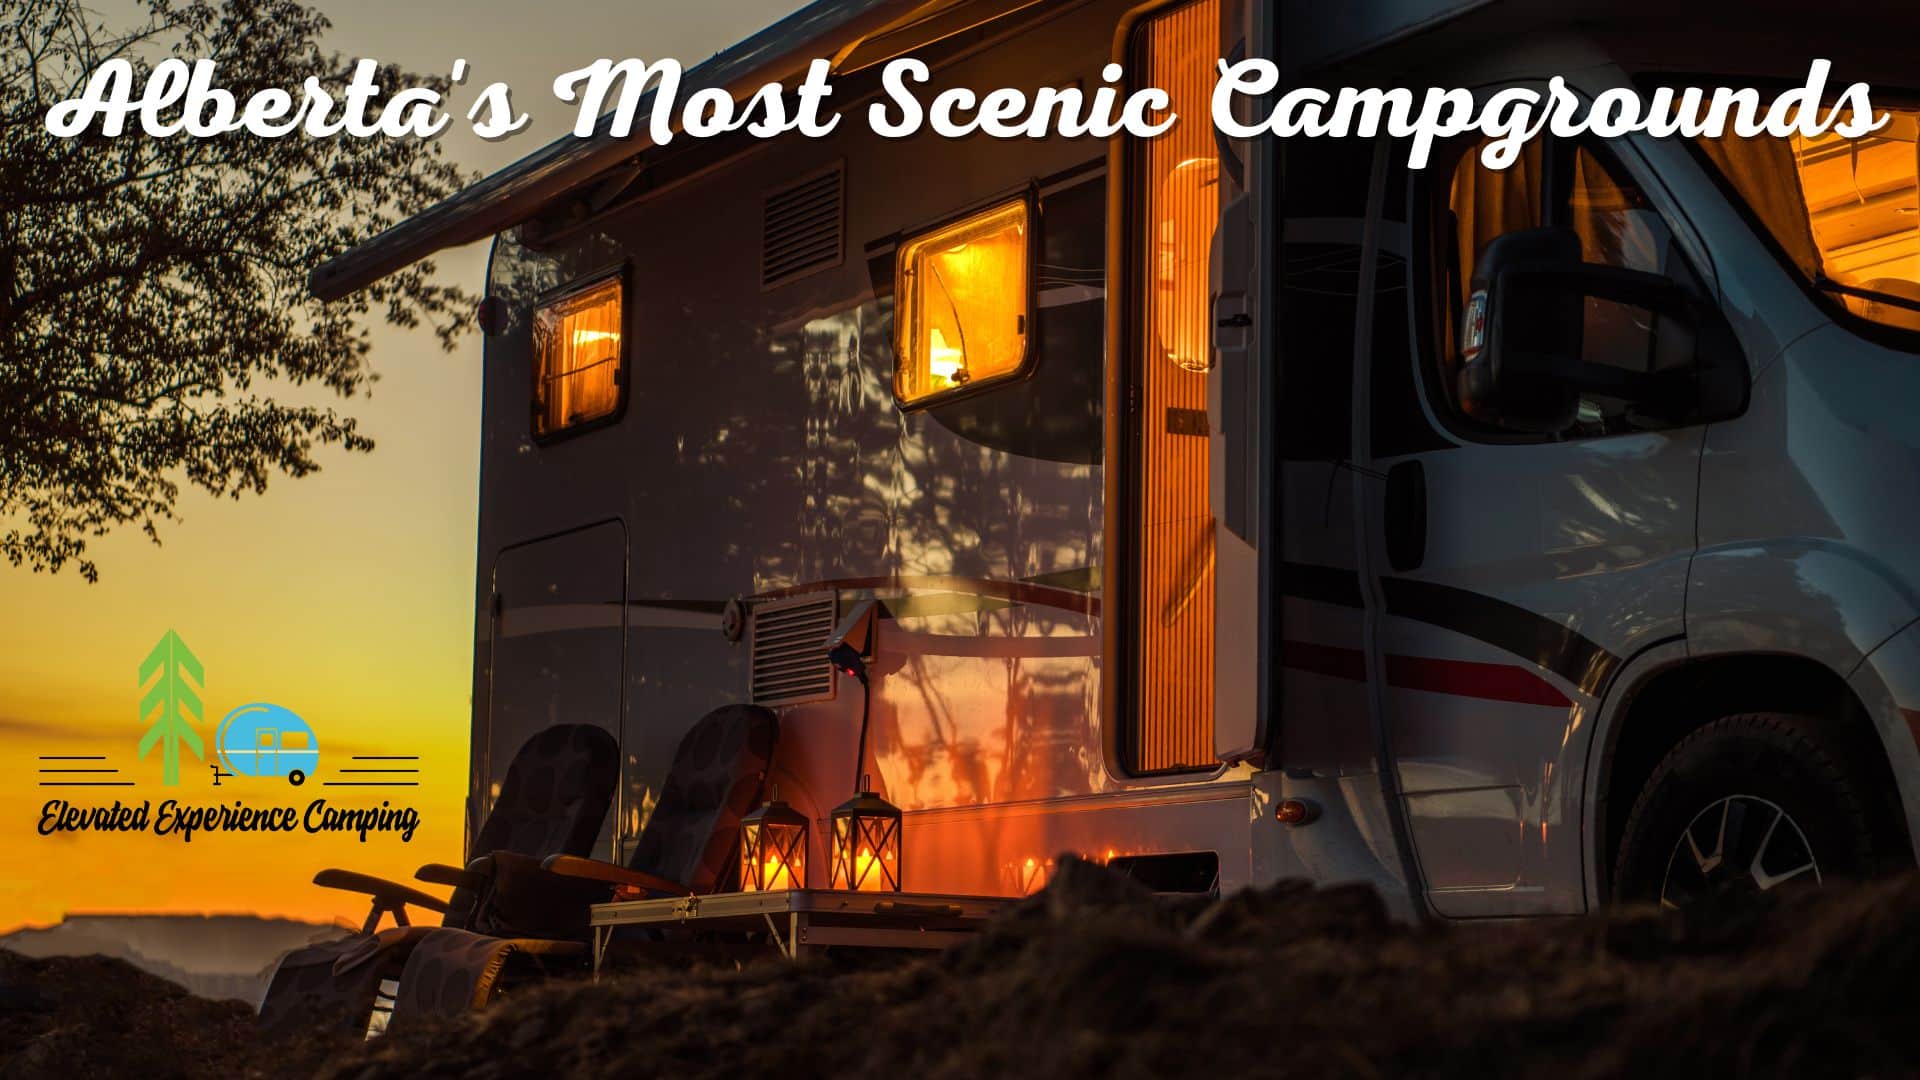 Take a look at Alberta's Most Scenic Campgrounds